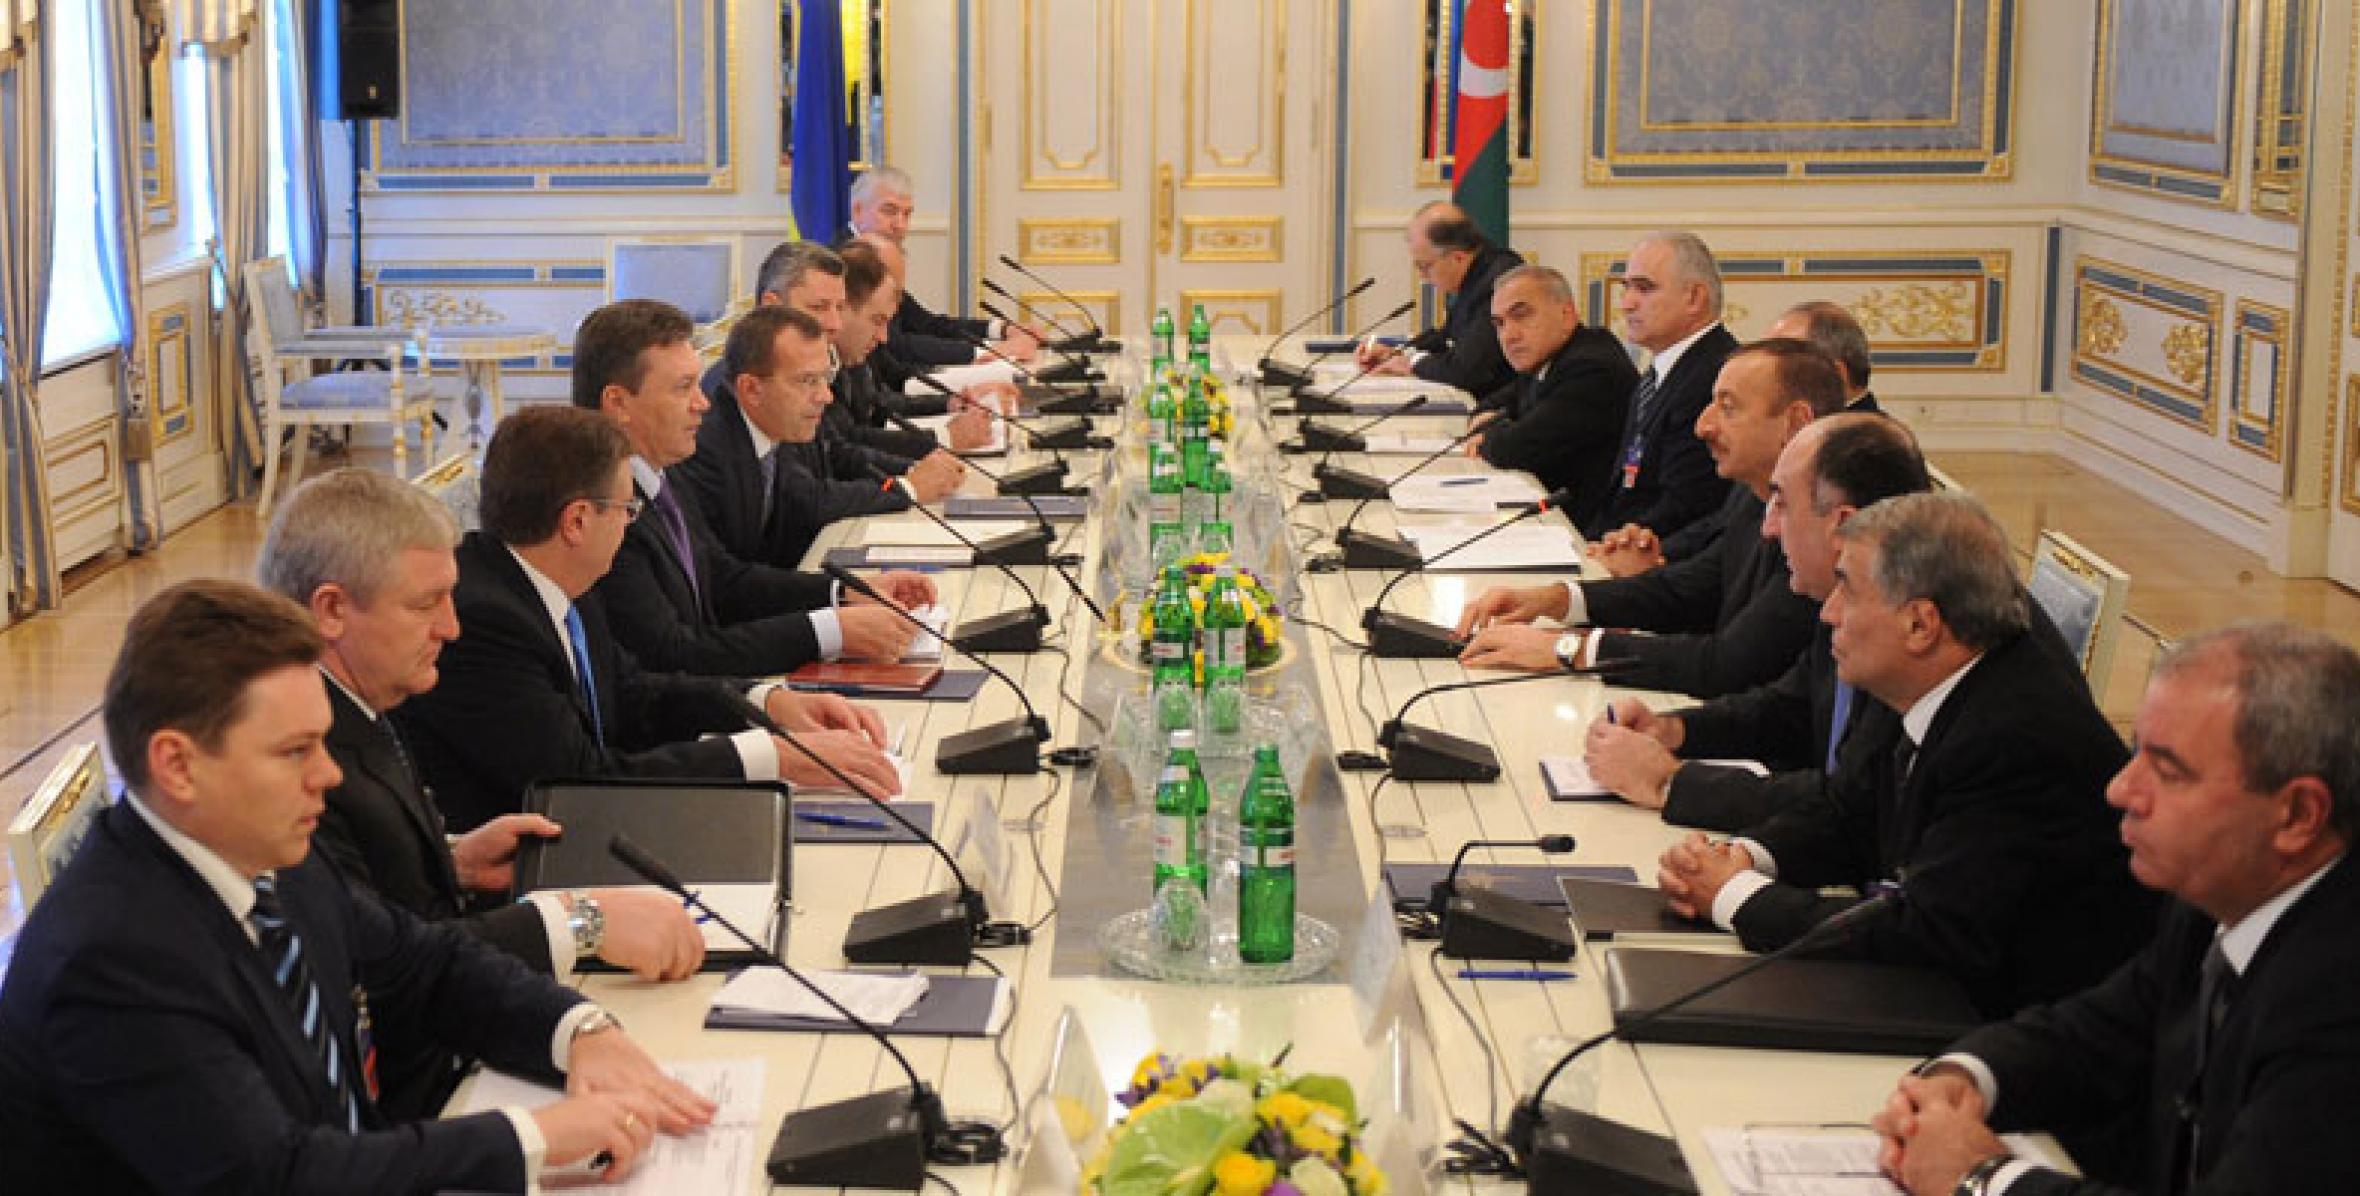 Second Meeting of the Council of the Presidents of Azerbaijan and Ukraine is held